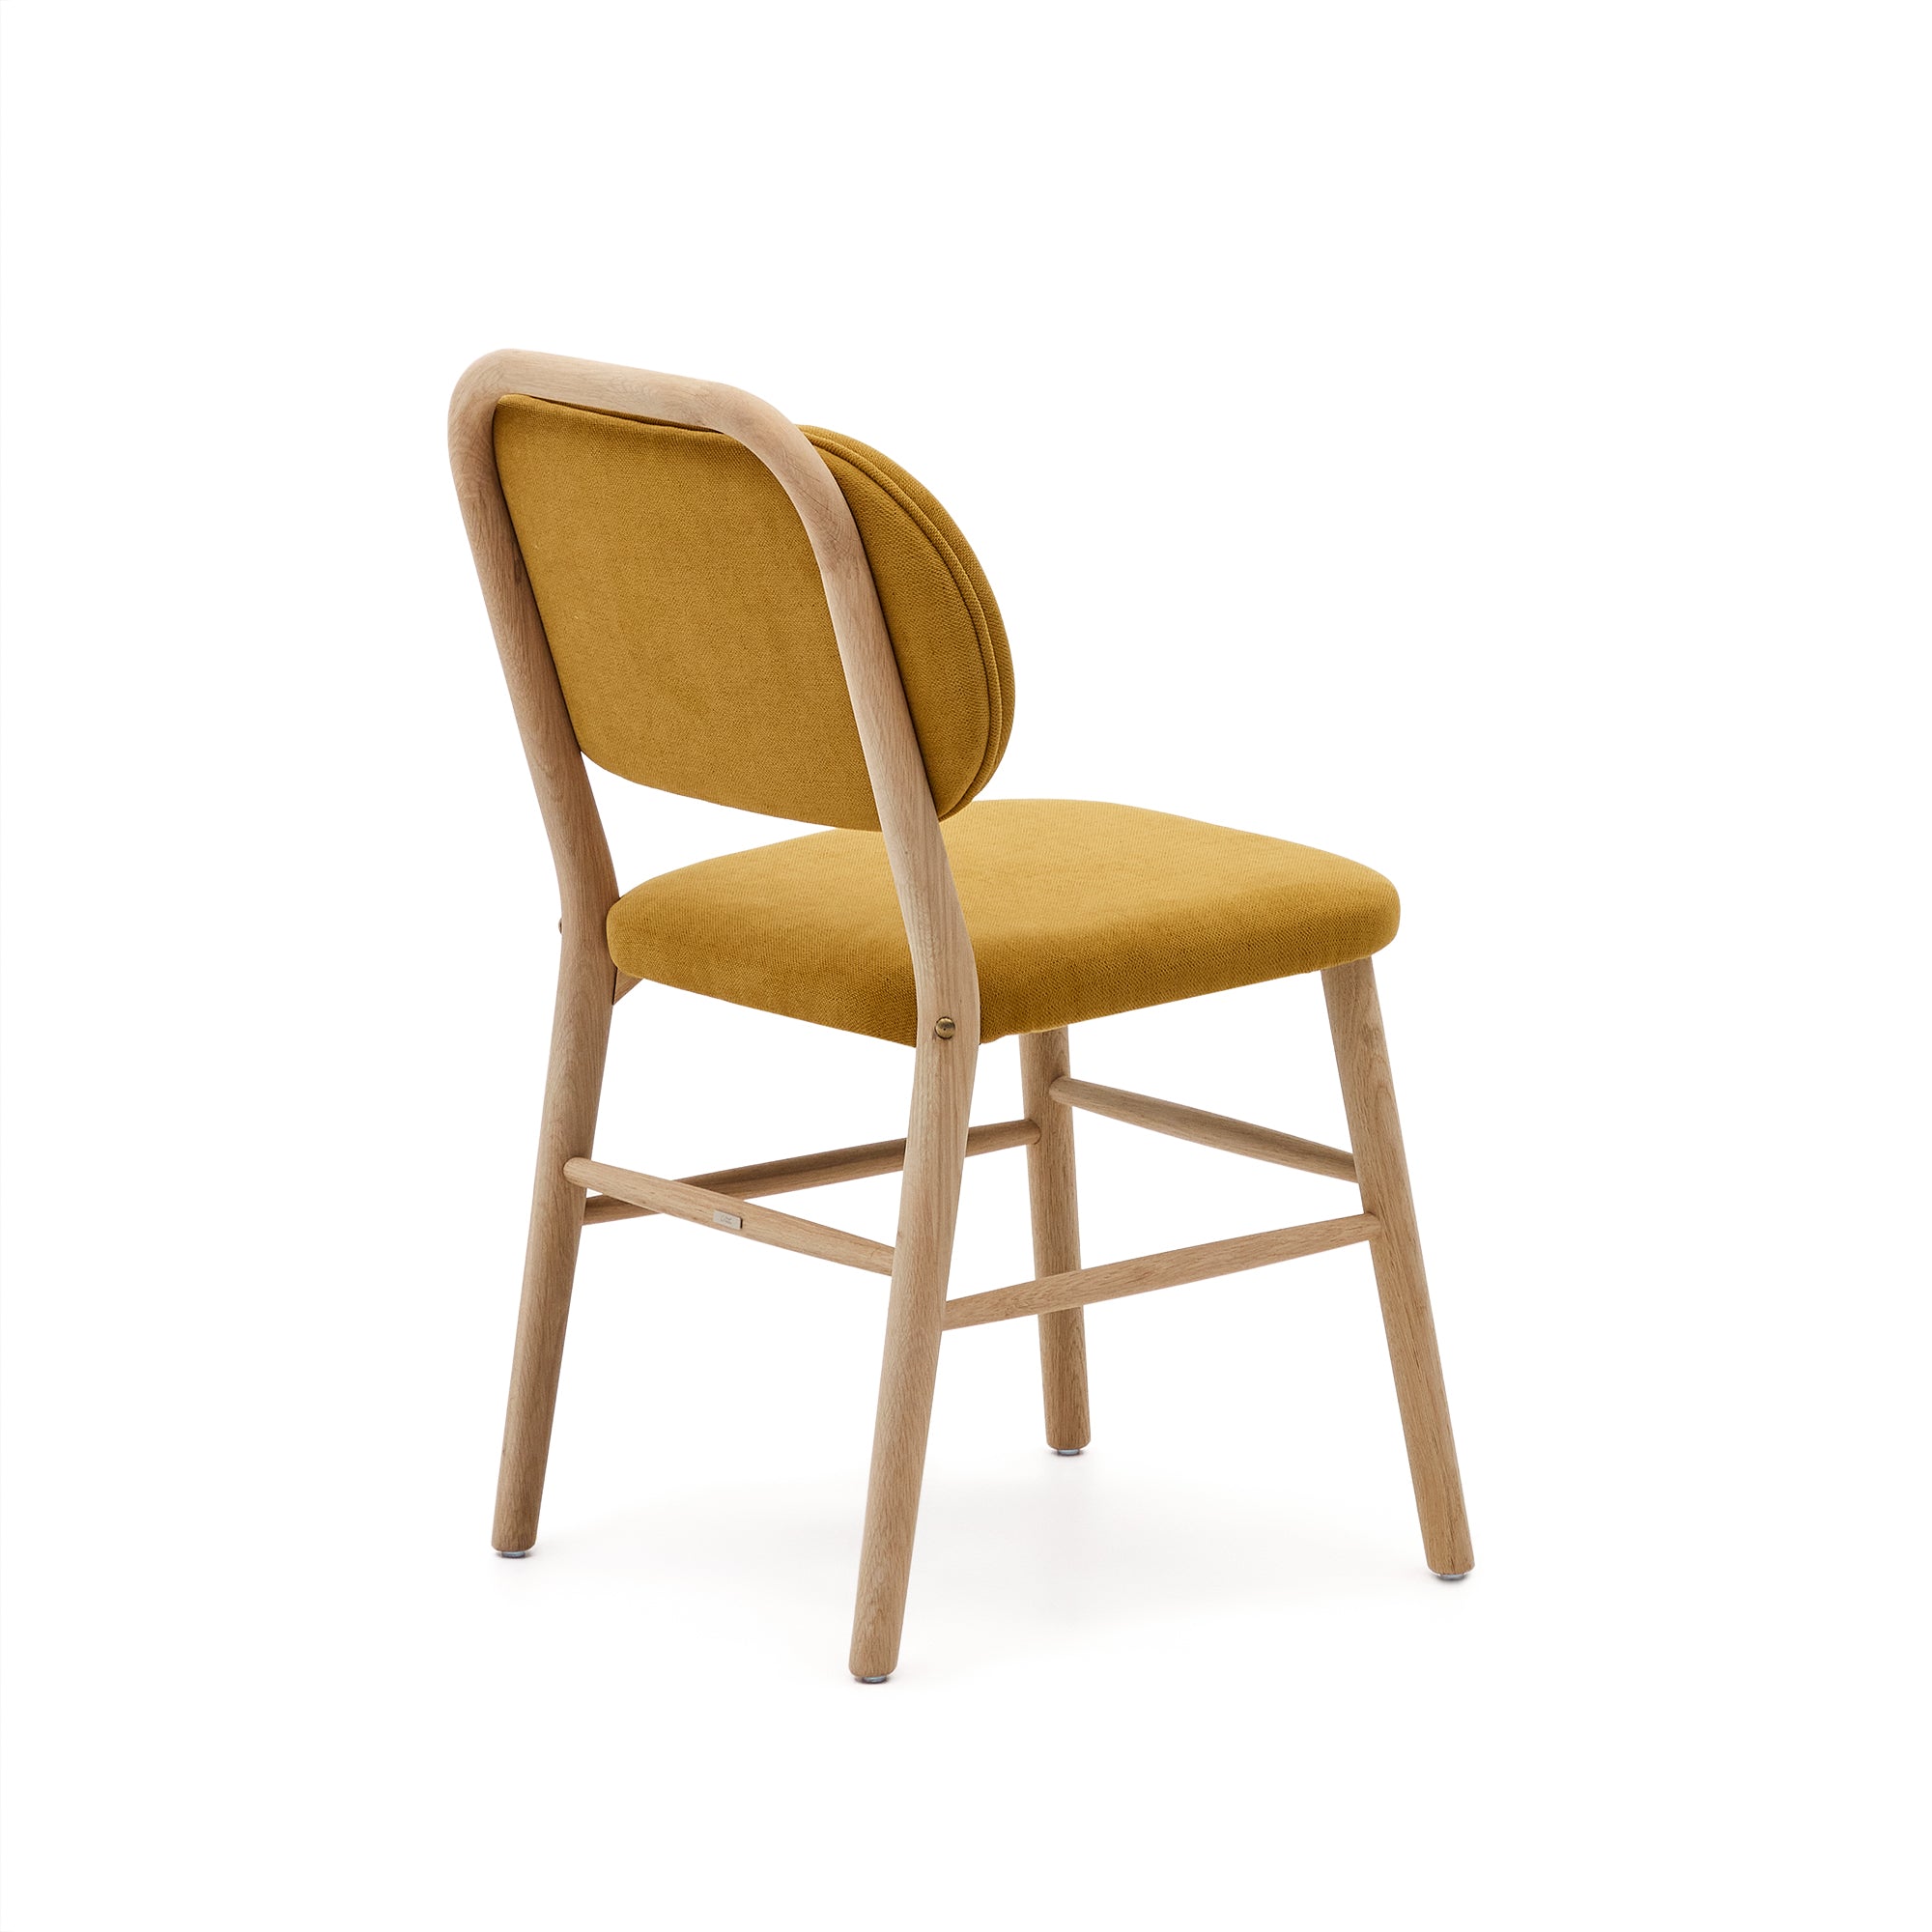 Helda chair in mustard chenille and solid oak wood